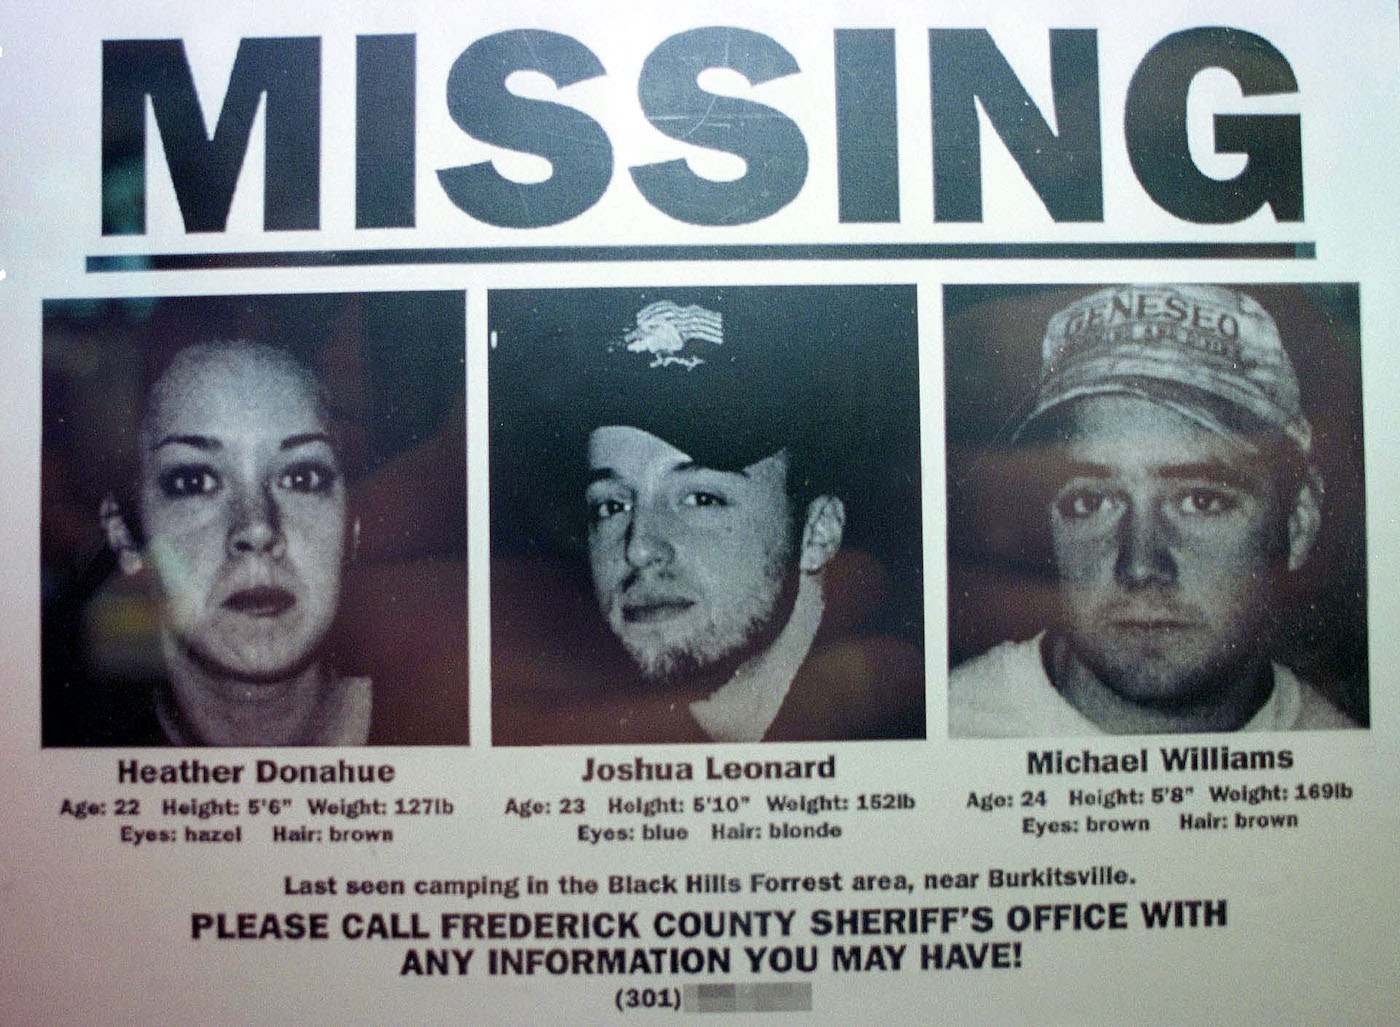 Fake 'missing persons' poster from 'The Blair Witch Project'